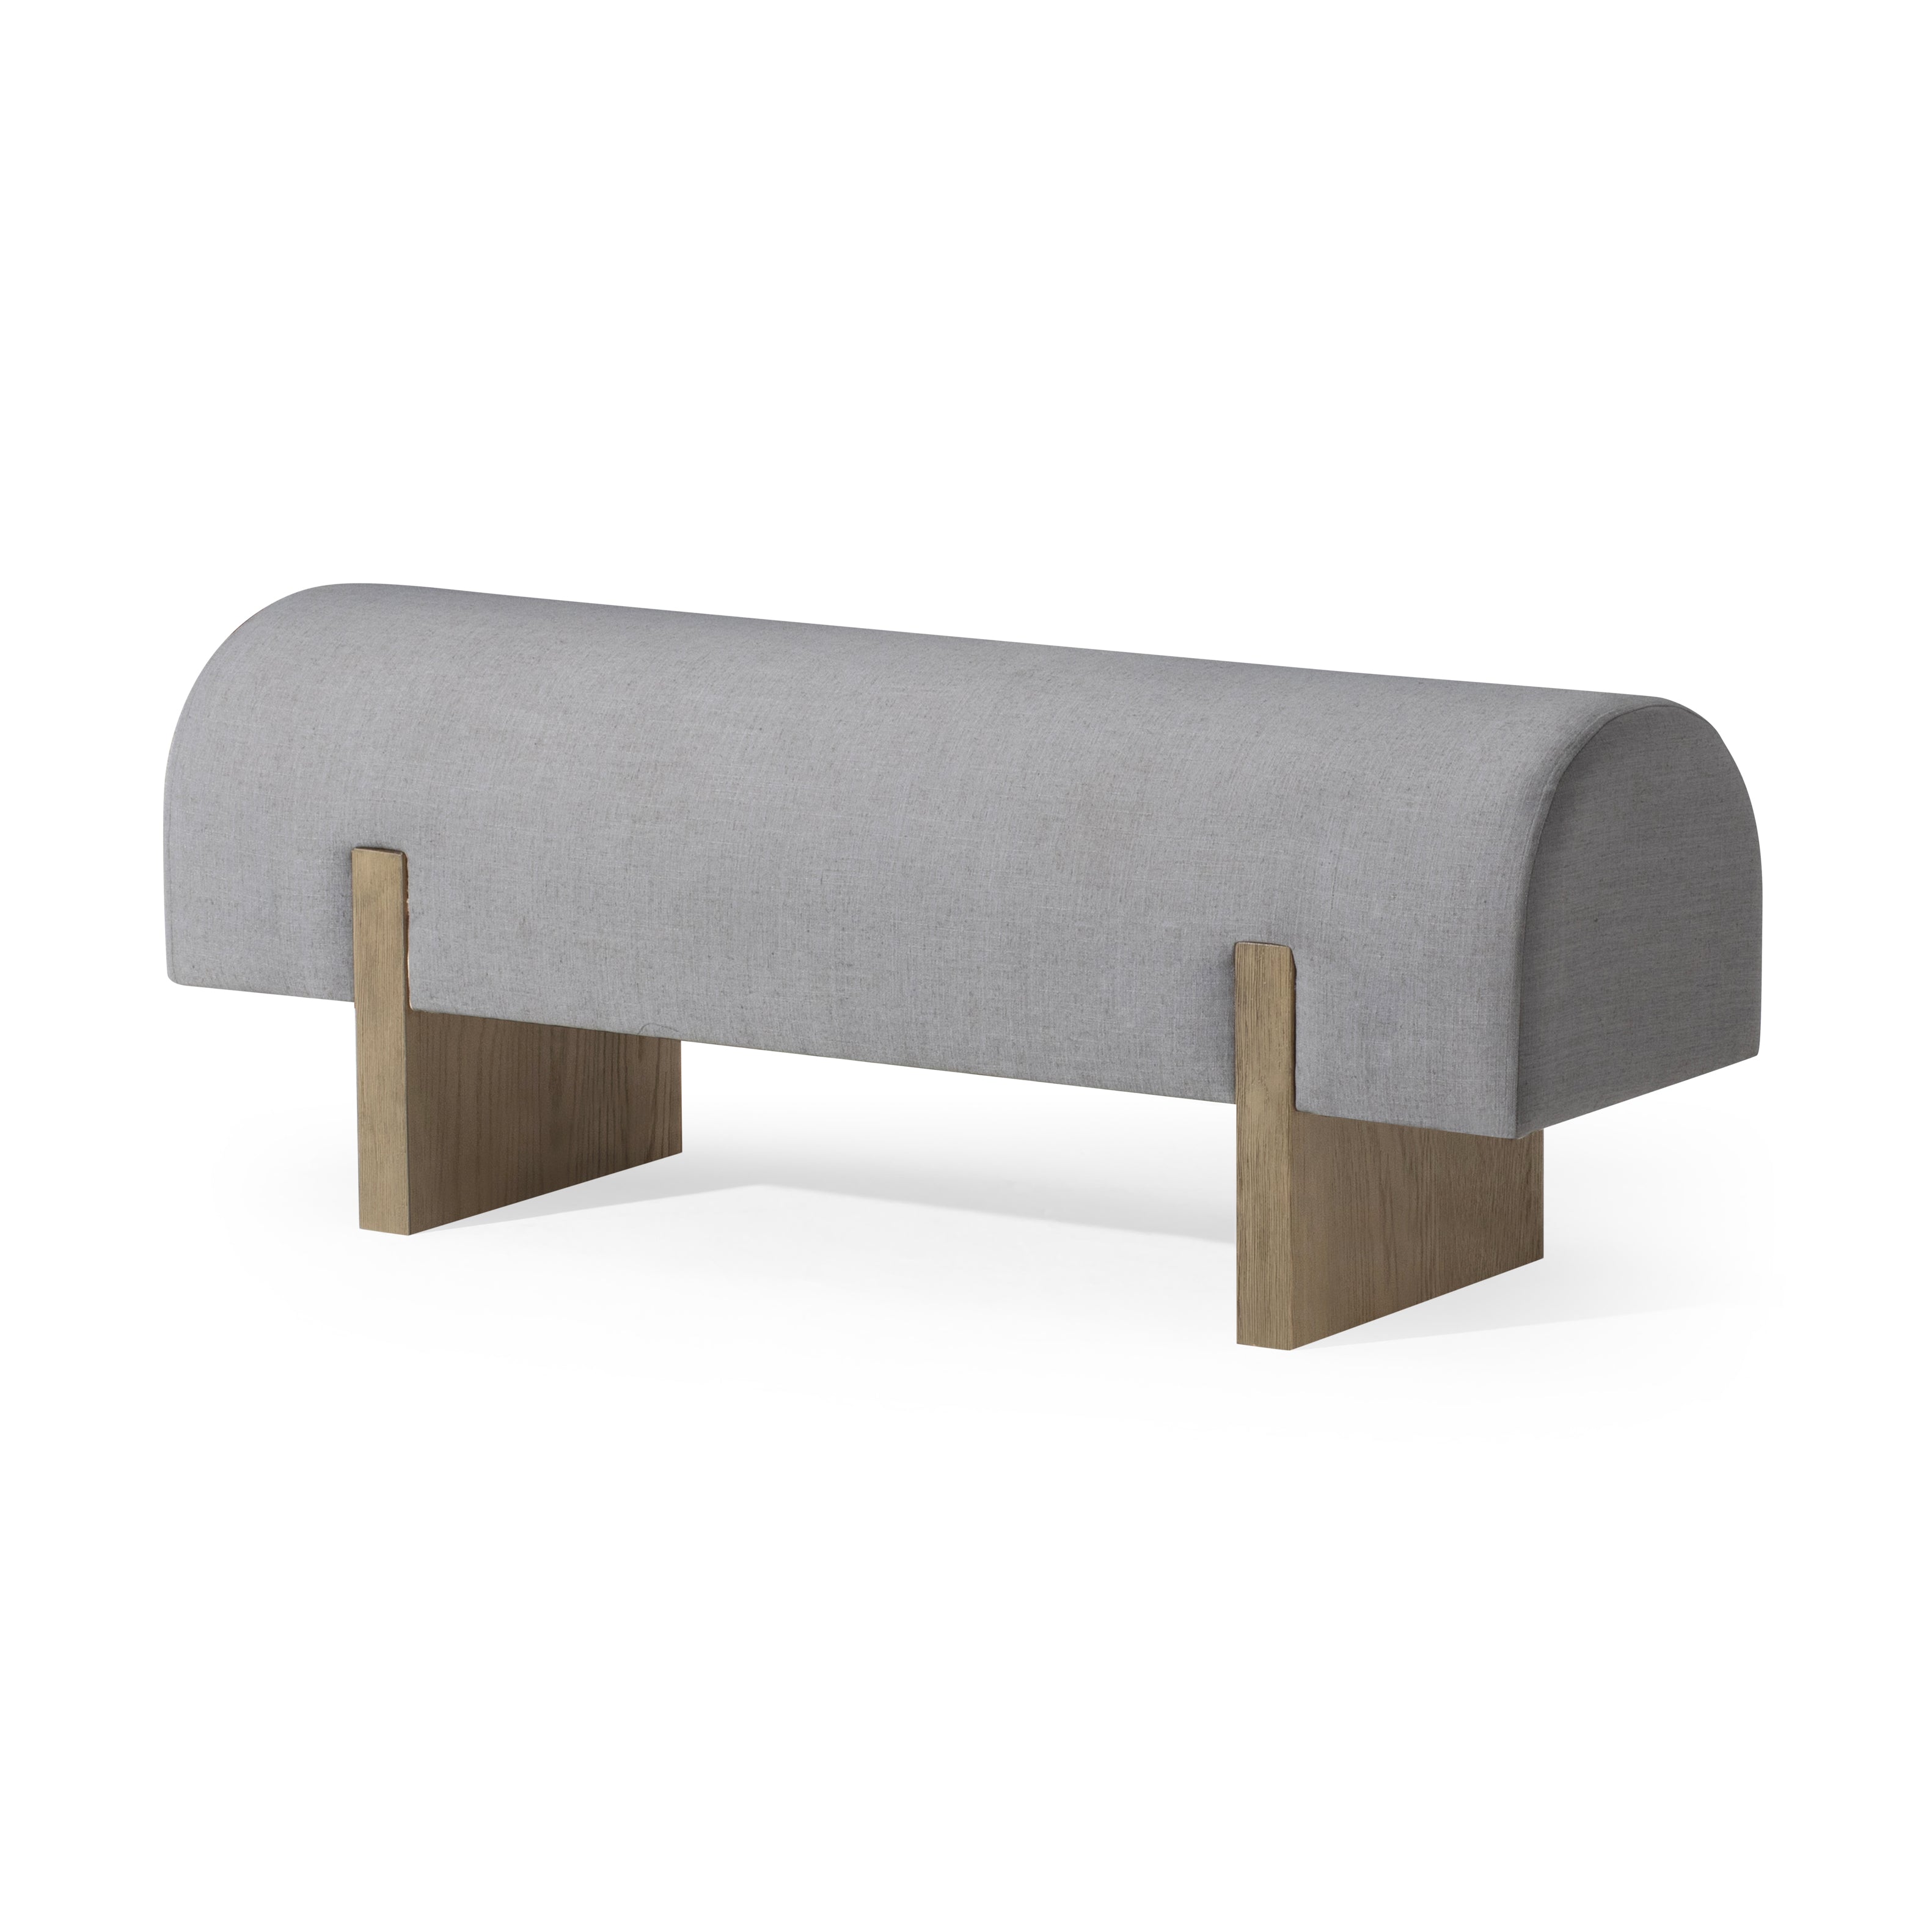 Juno Modern Upholstered Wooden Bench in Refined Grey Finish